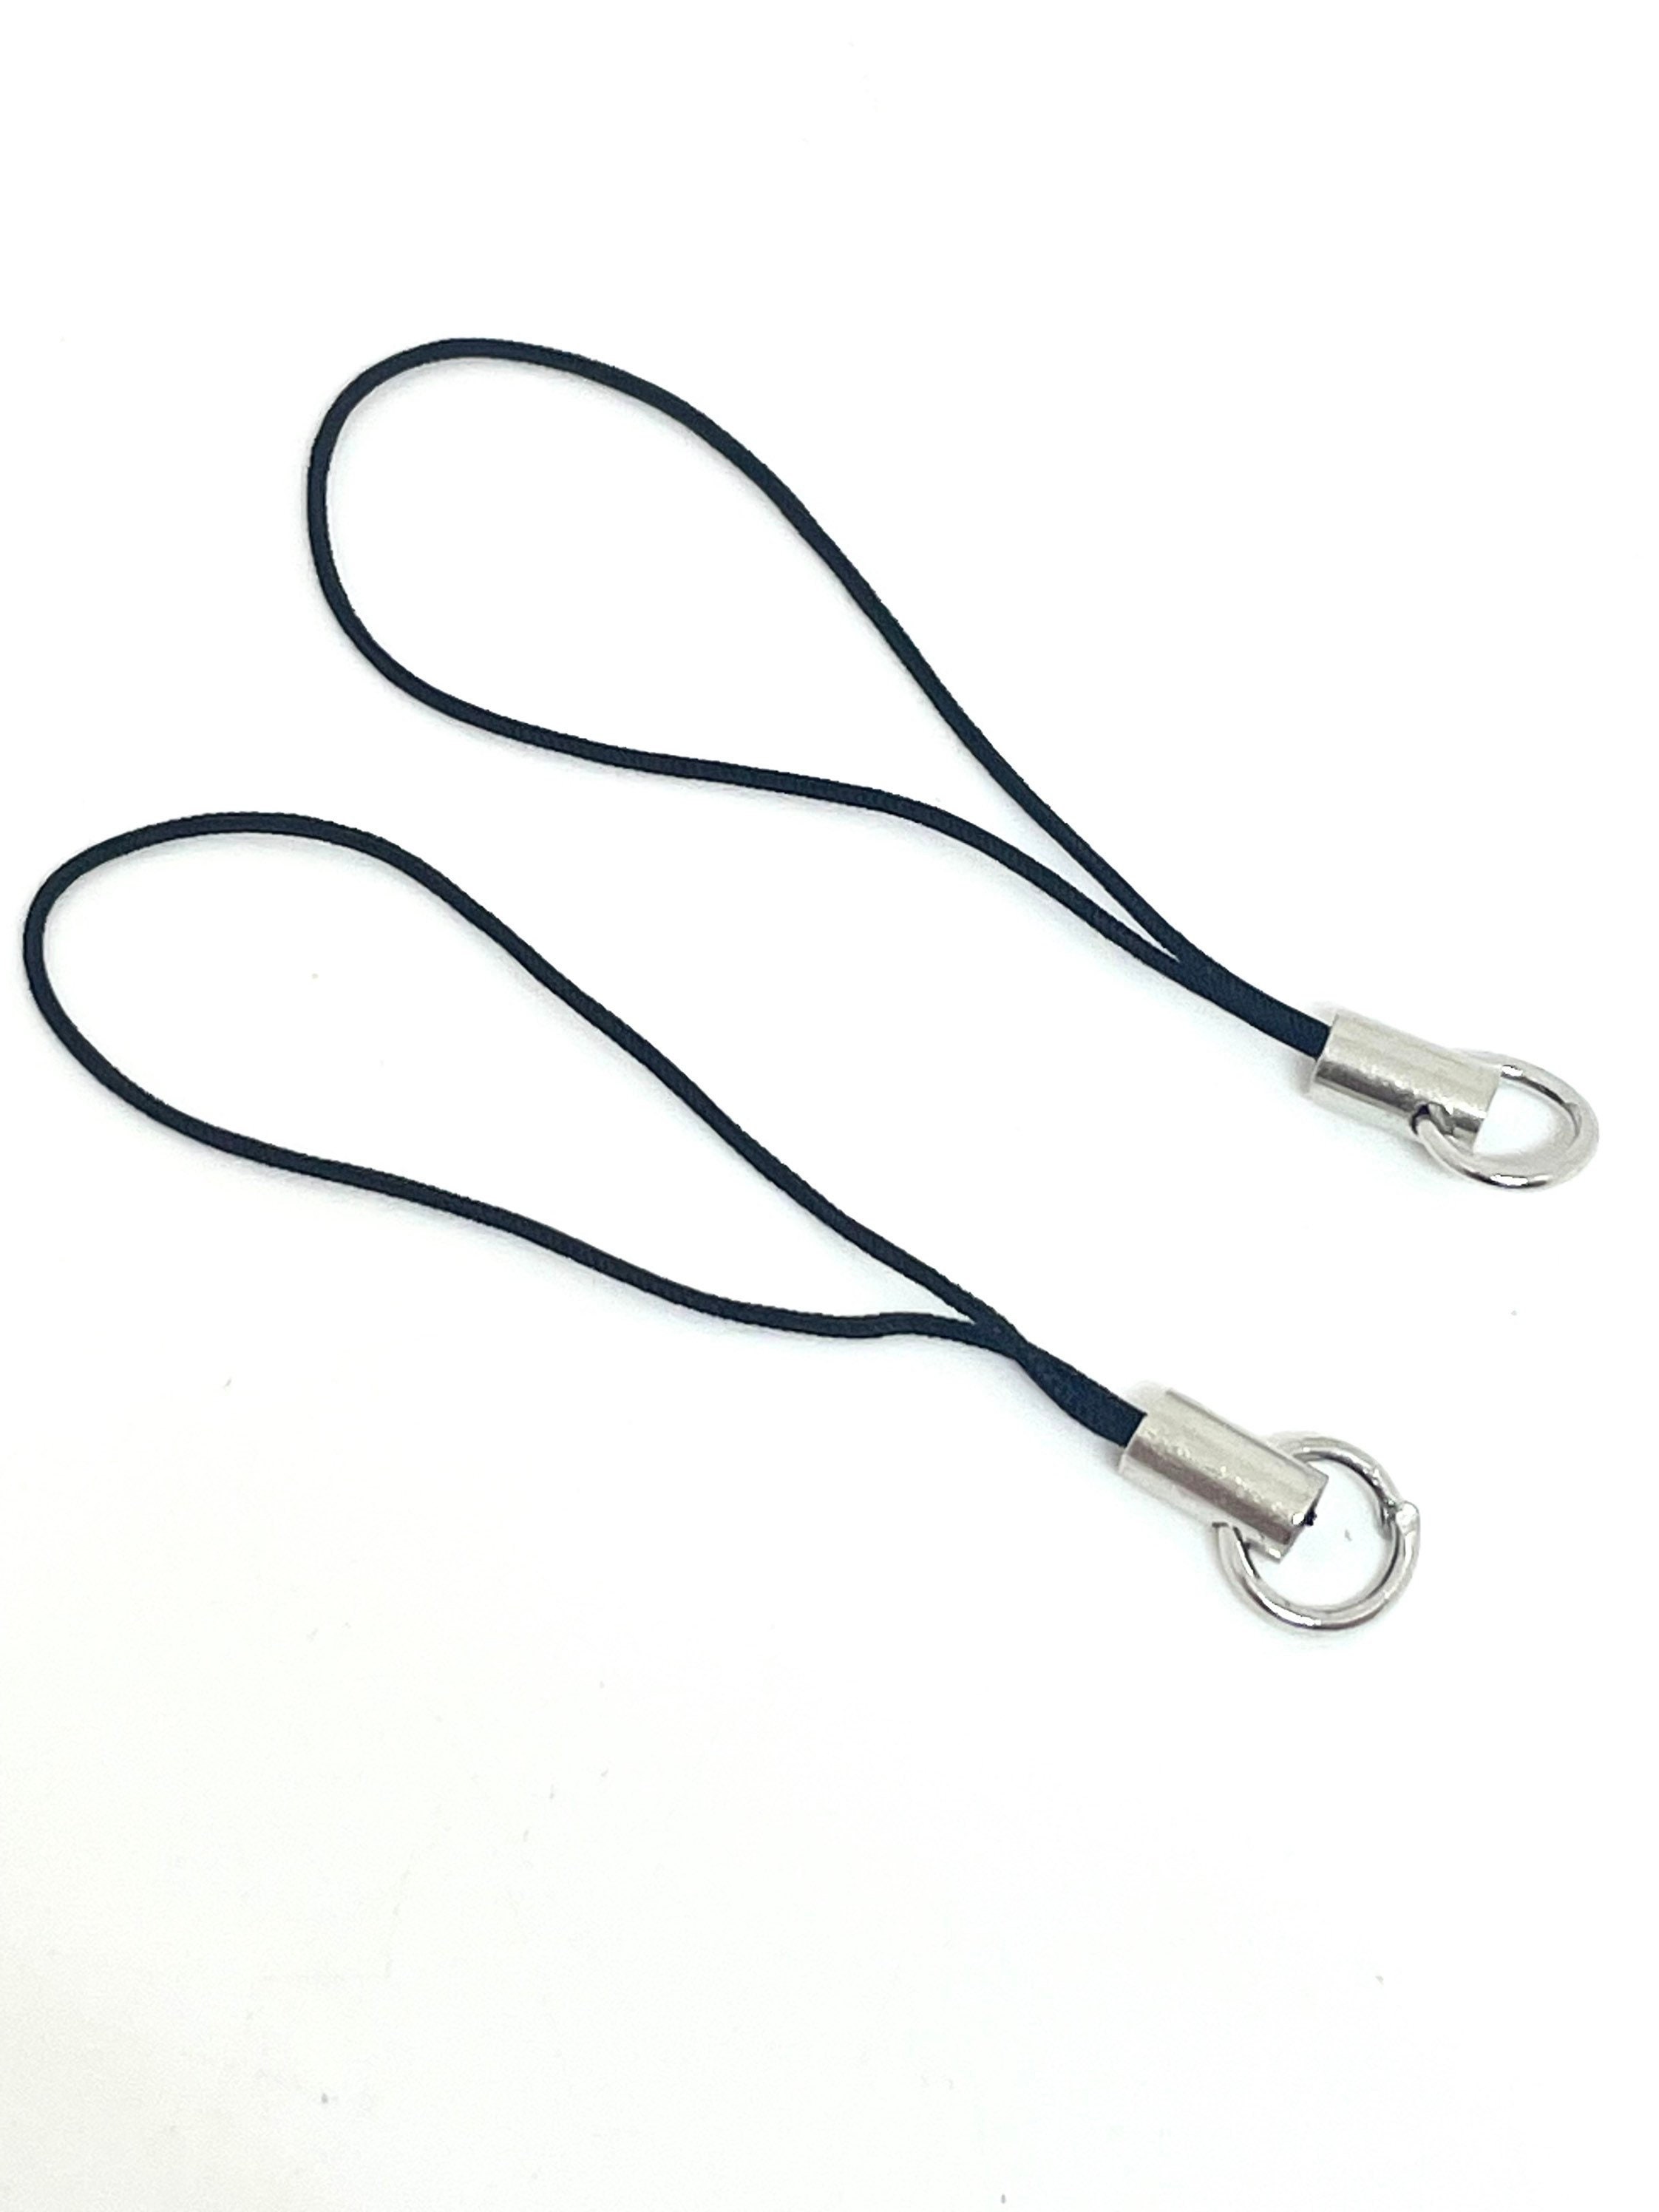 Sublimation White Polyester Lanyard Keychains Lot of 10pcs with Metal Hooks